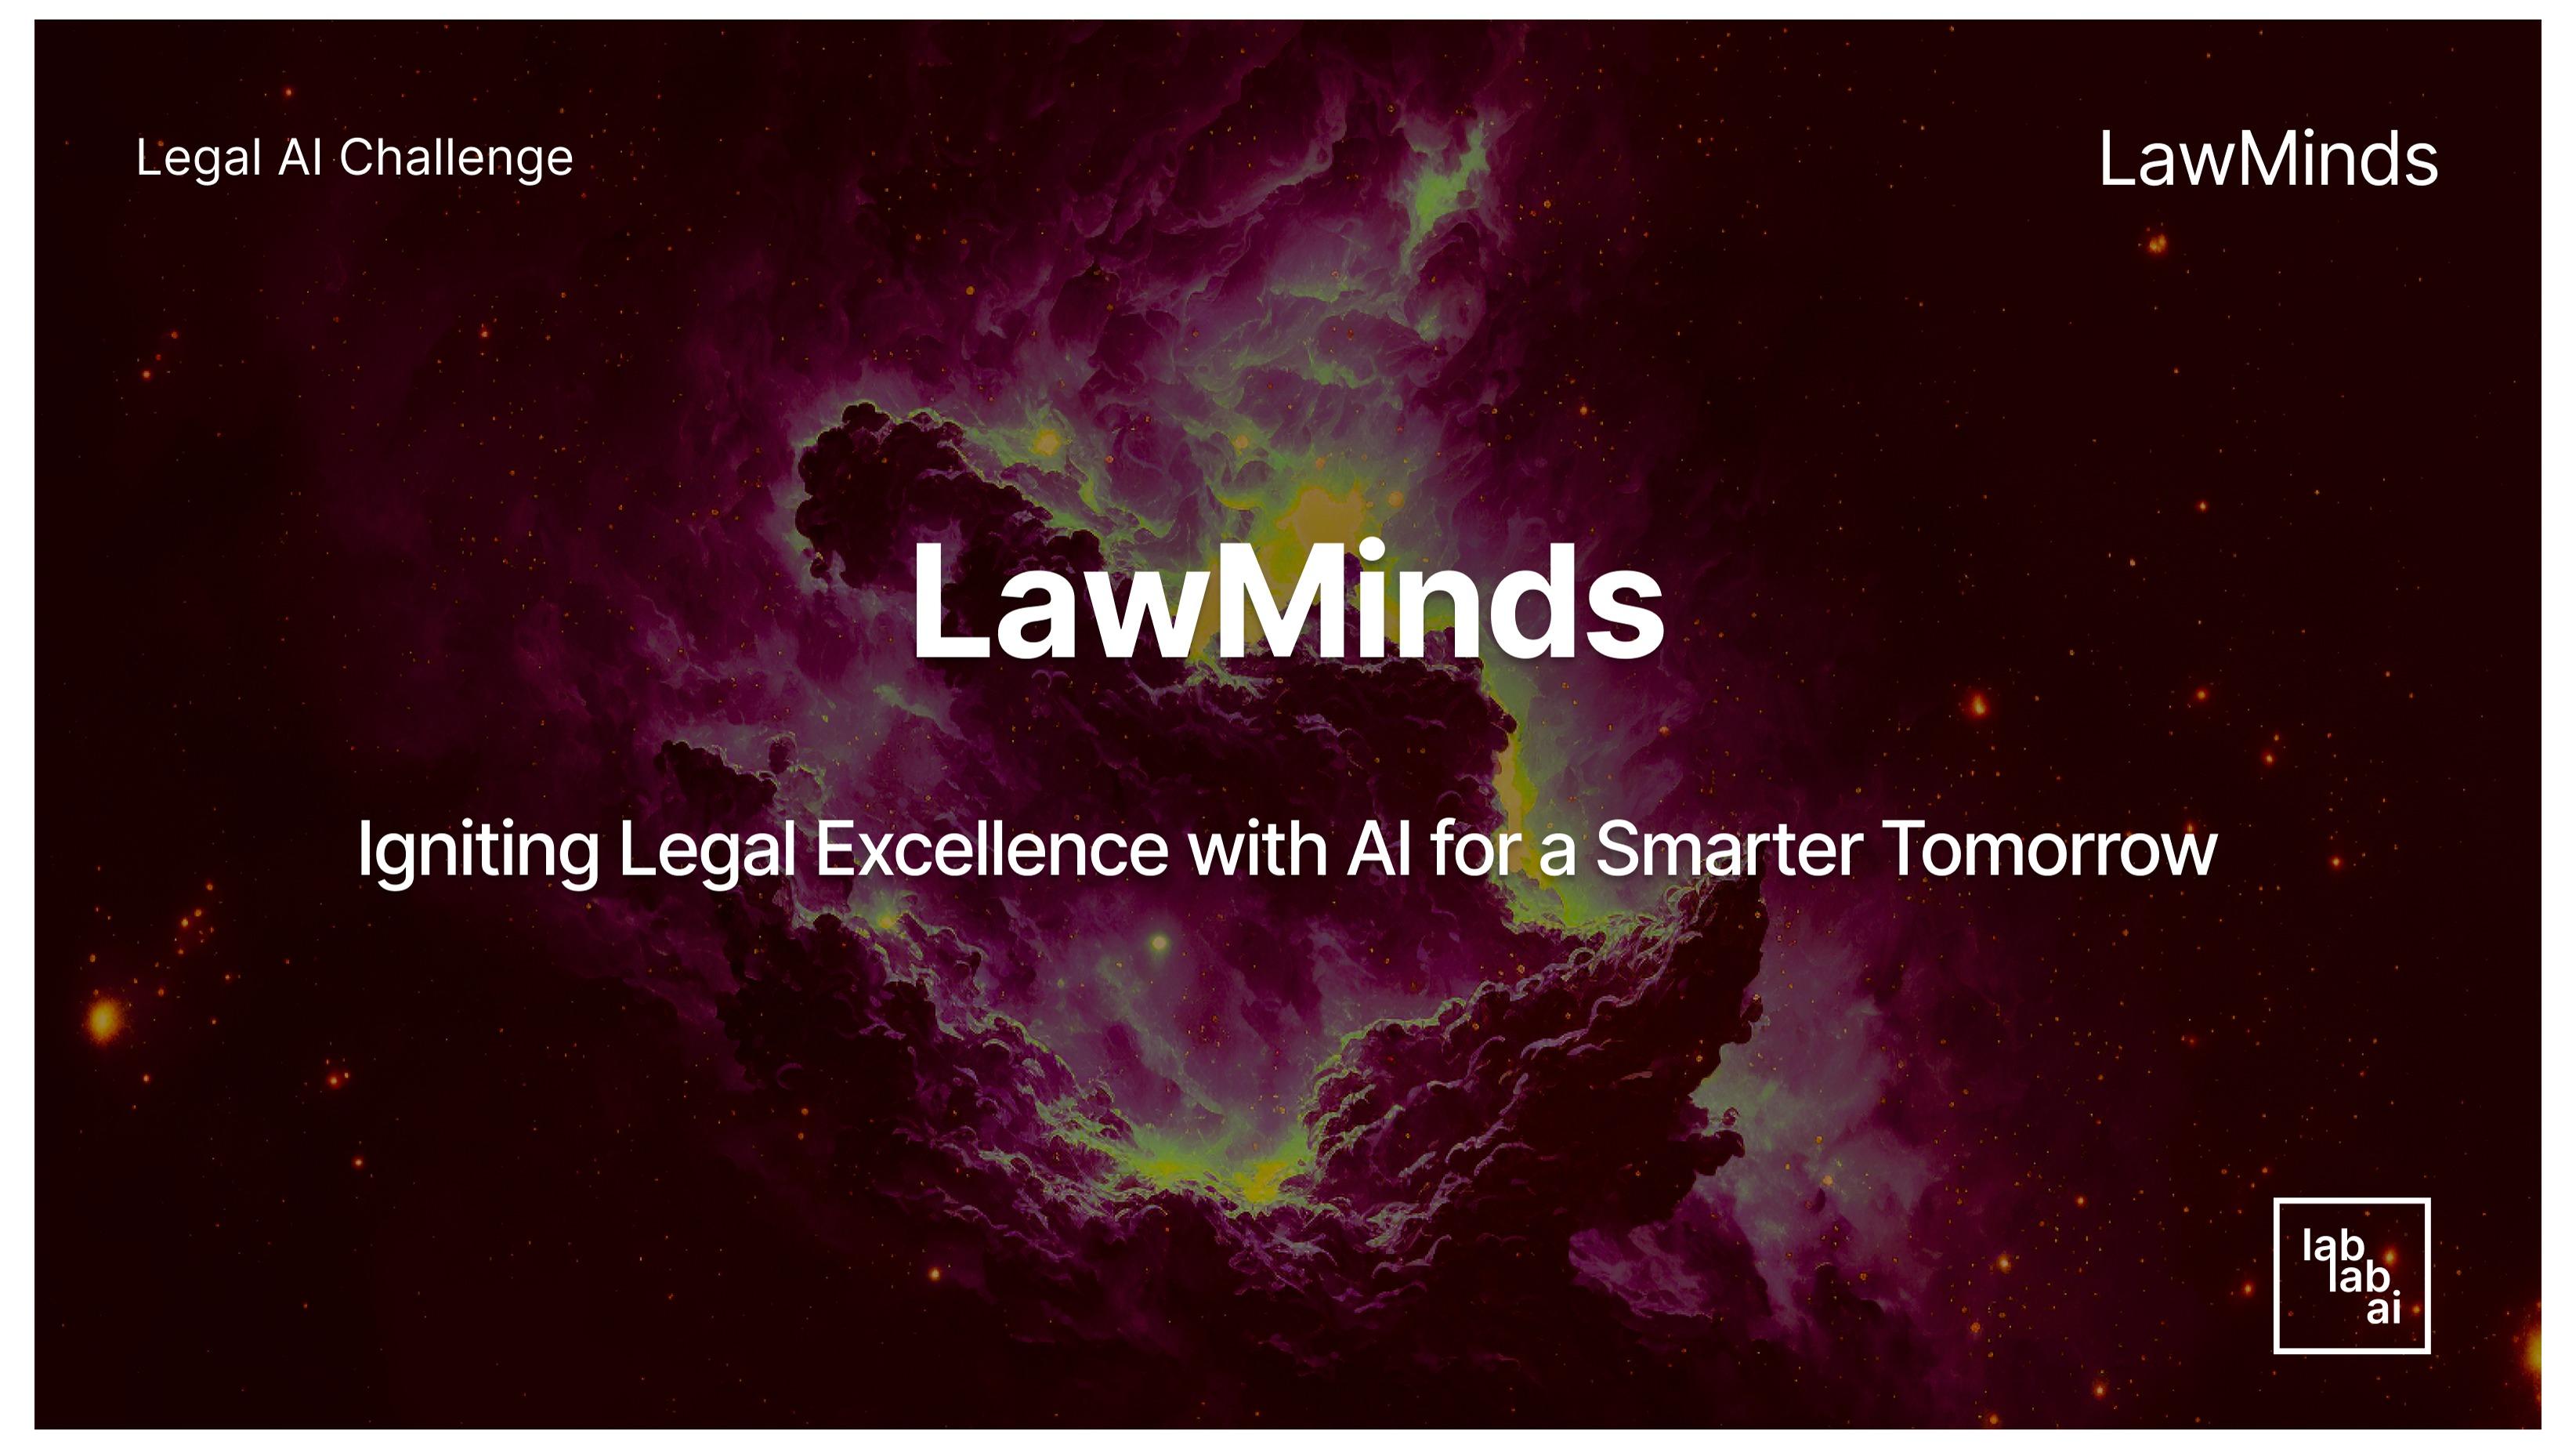 LawMinds